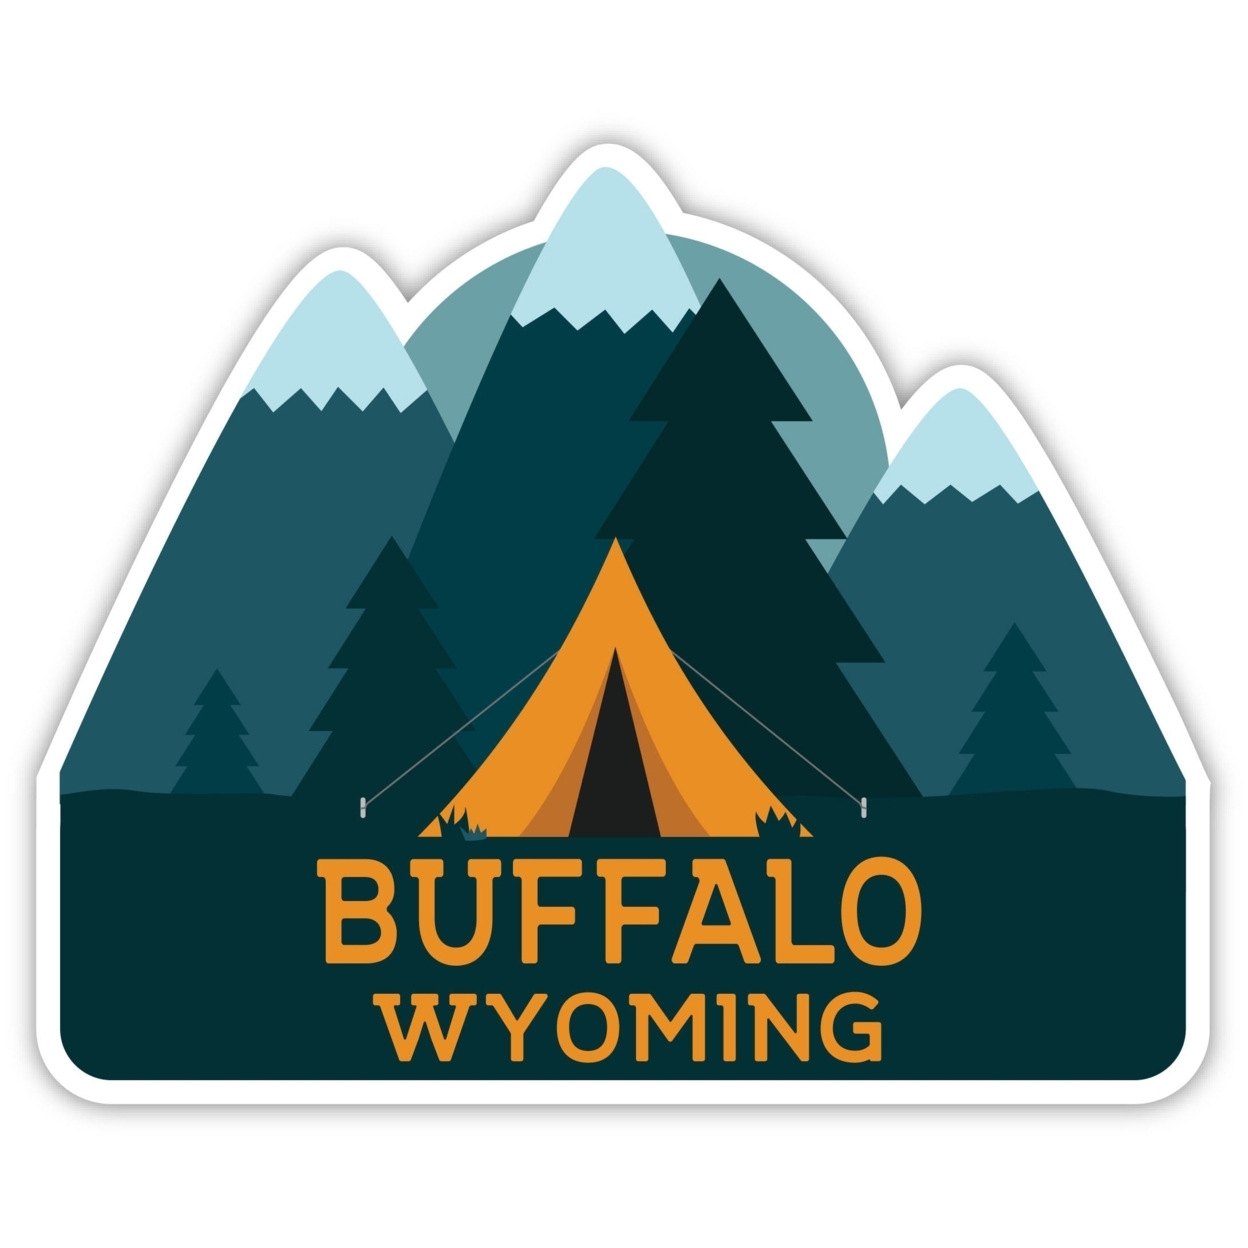 Buffalo Wyoming Souvenir Decorative Stickers (Choose Theme And Size) - 4-Pack, 12-Inch, Adventures Awaits